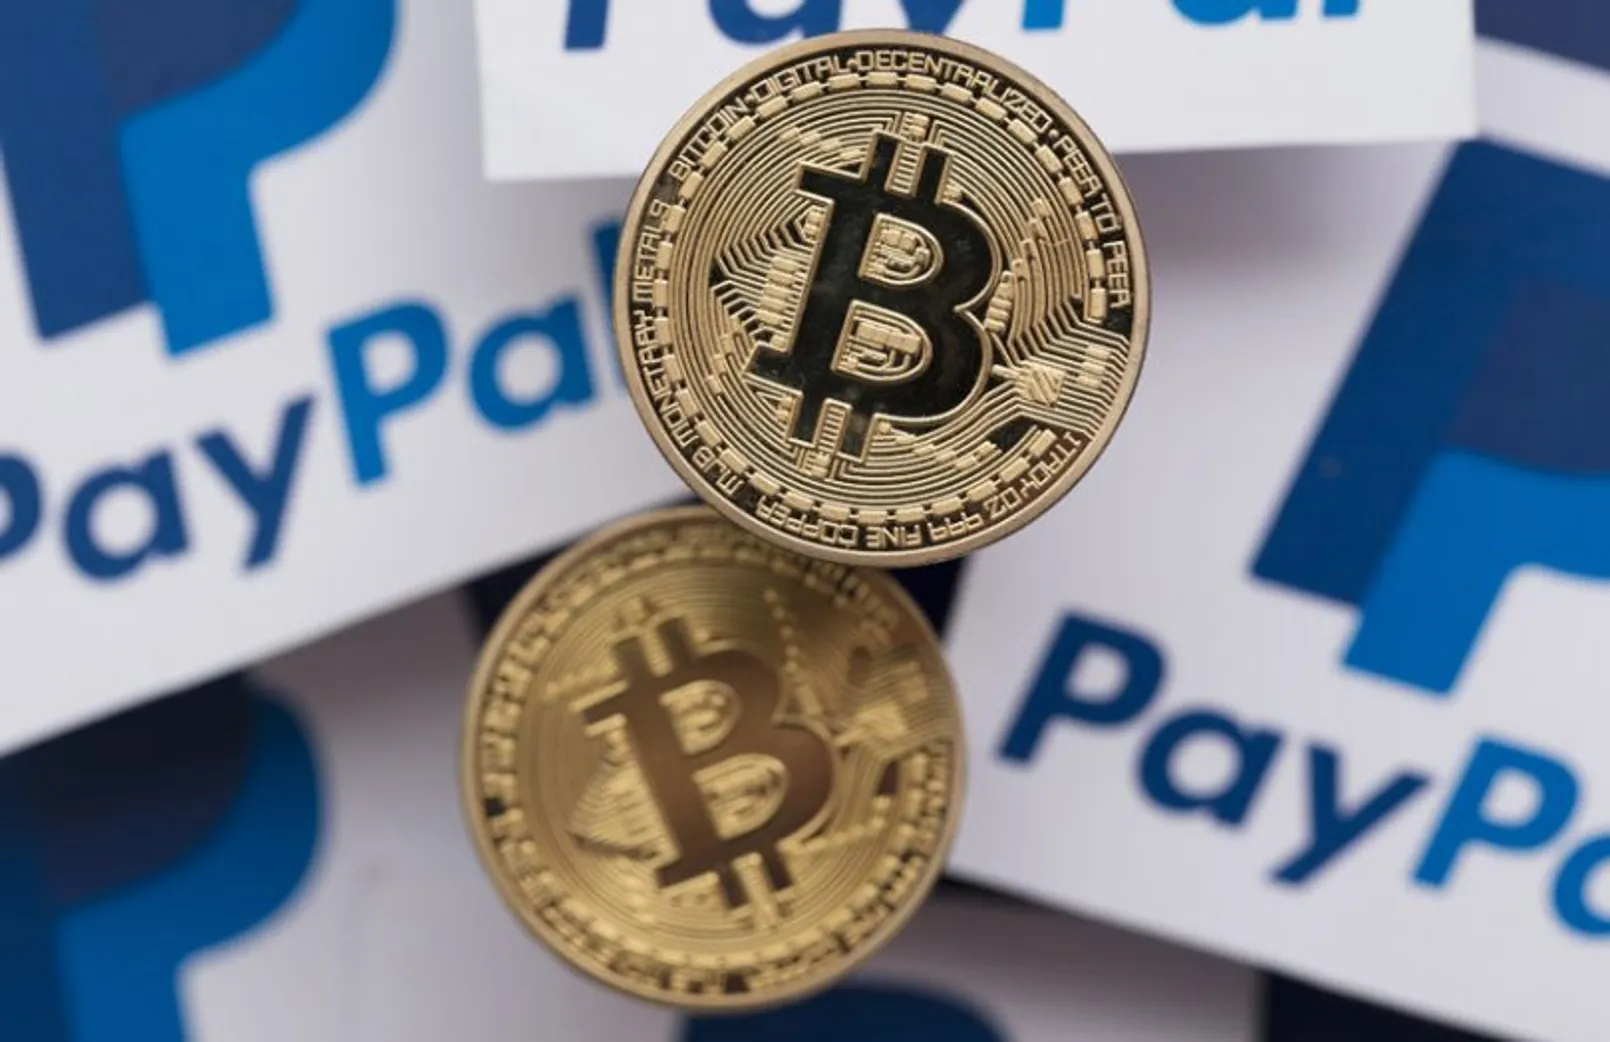 Paypal Cryptocurrency Bitcoin 810x524 1.jpeg